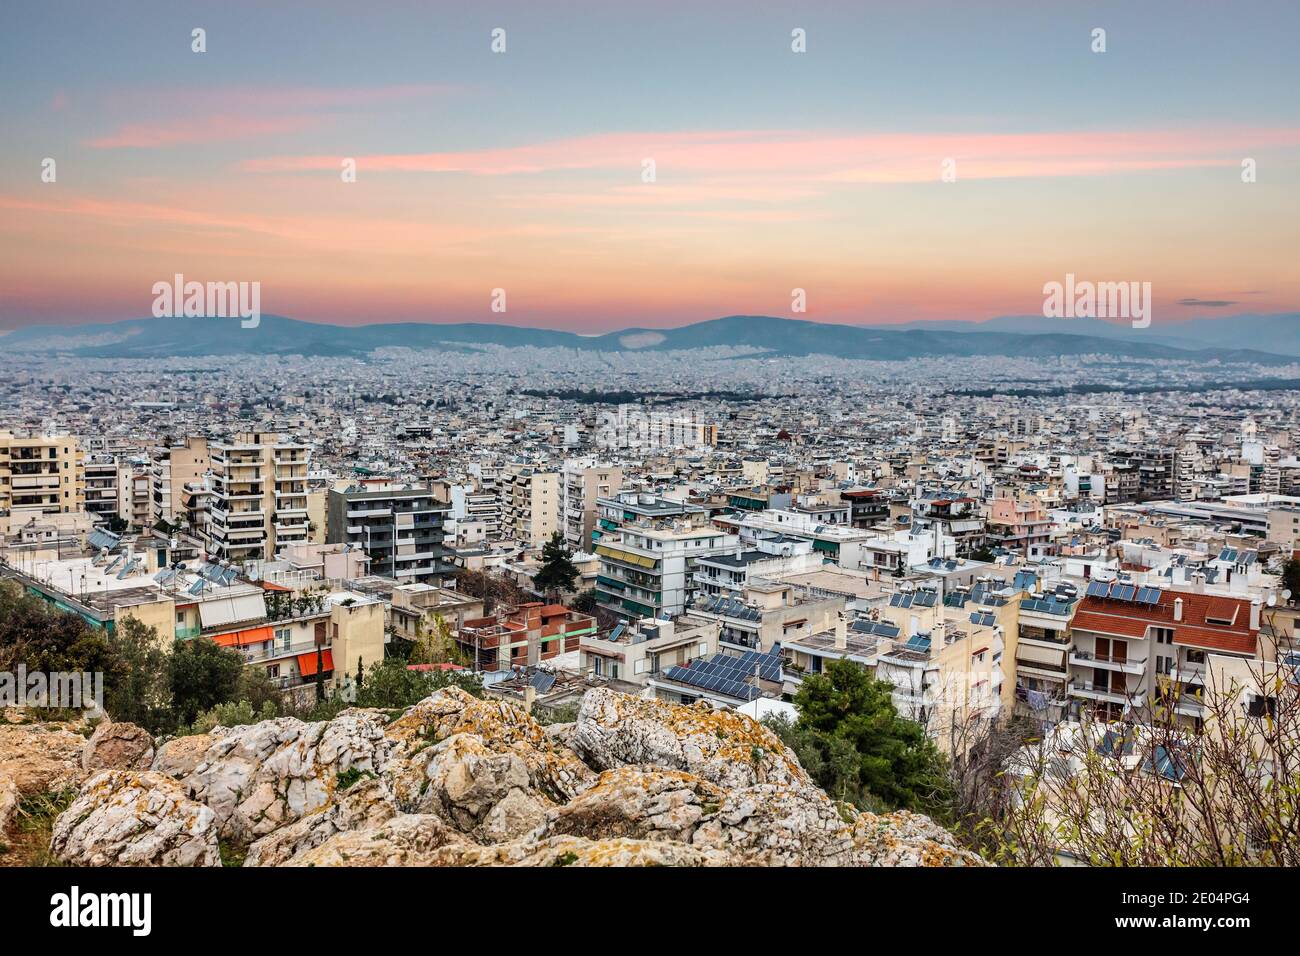 Panoramic view of the Galatsi area at sunset in Athens, Greece Stock Photo